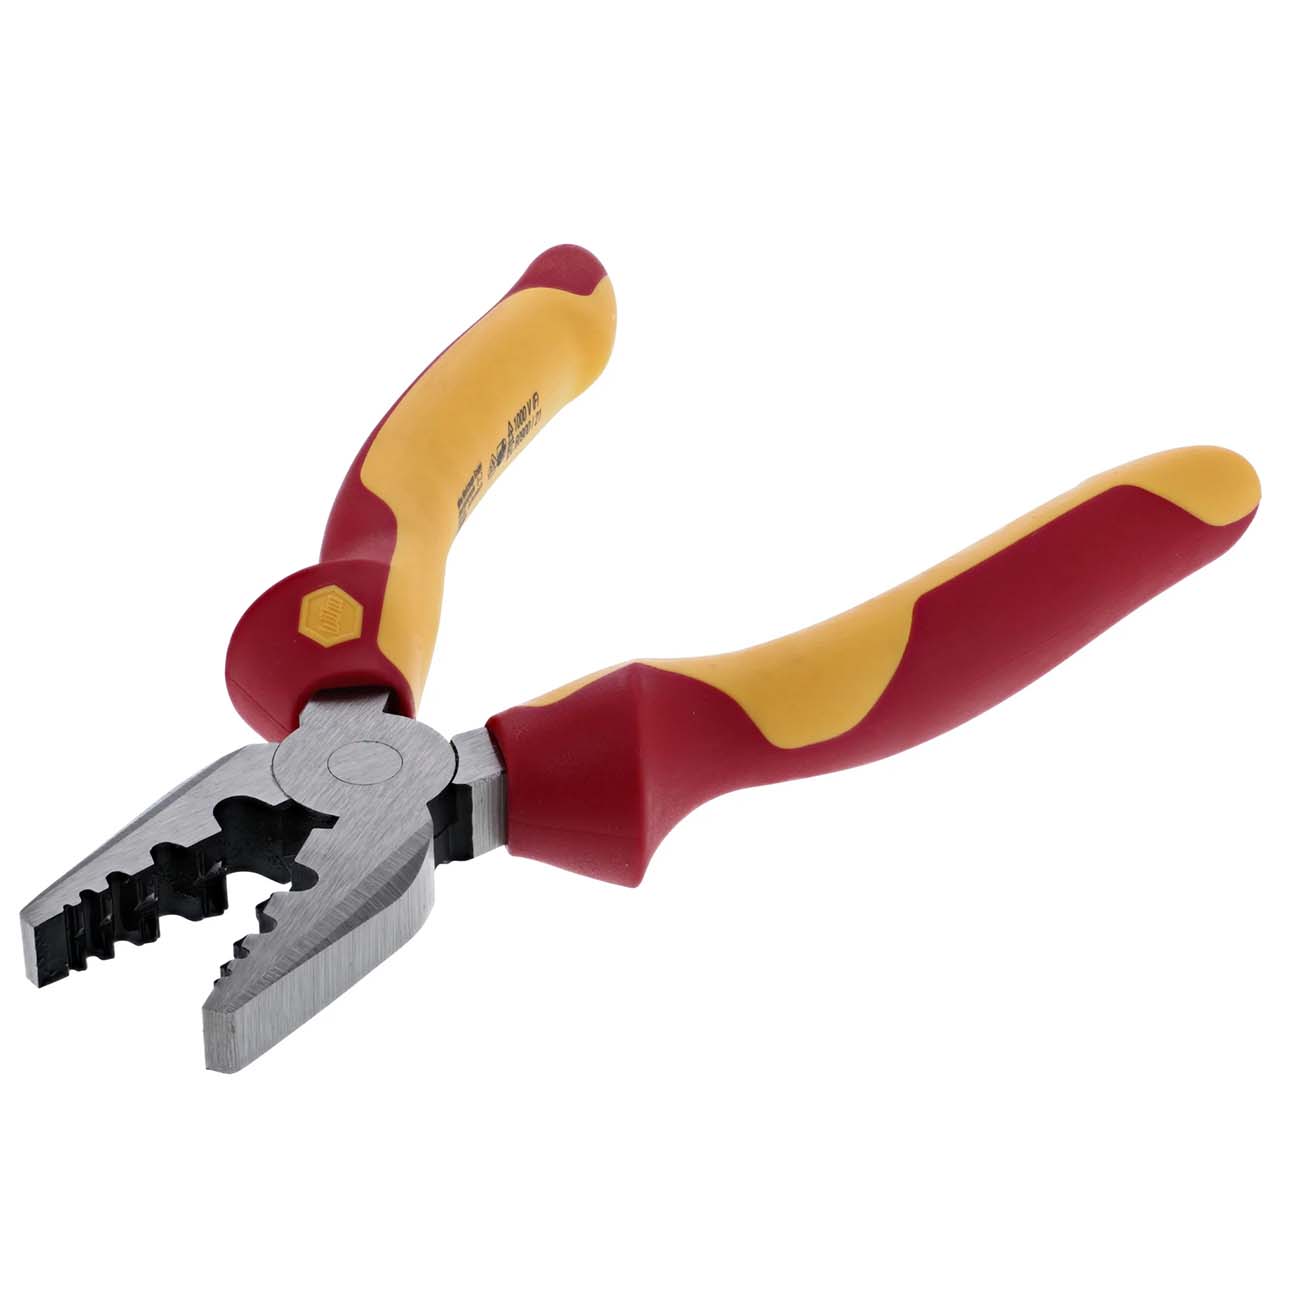 Wiha Insulated Industrial Crimping Pliers - 7" Overall Length